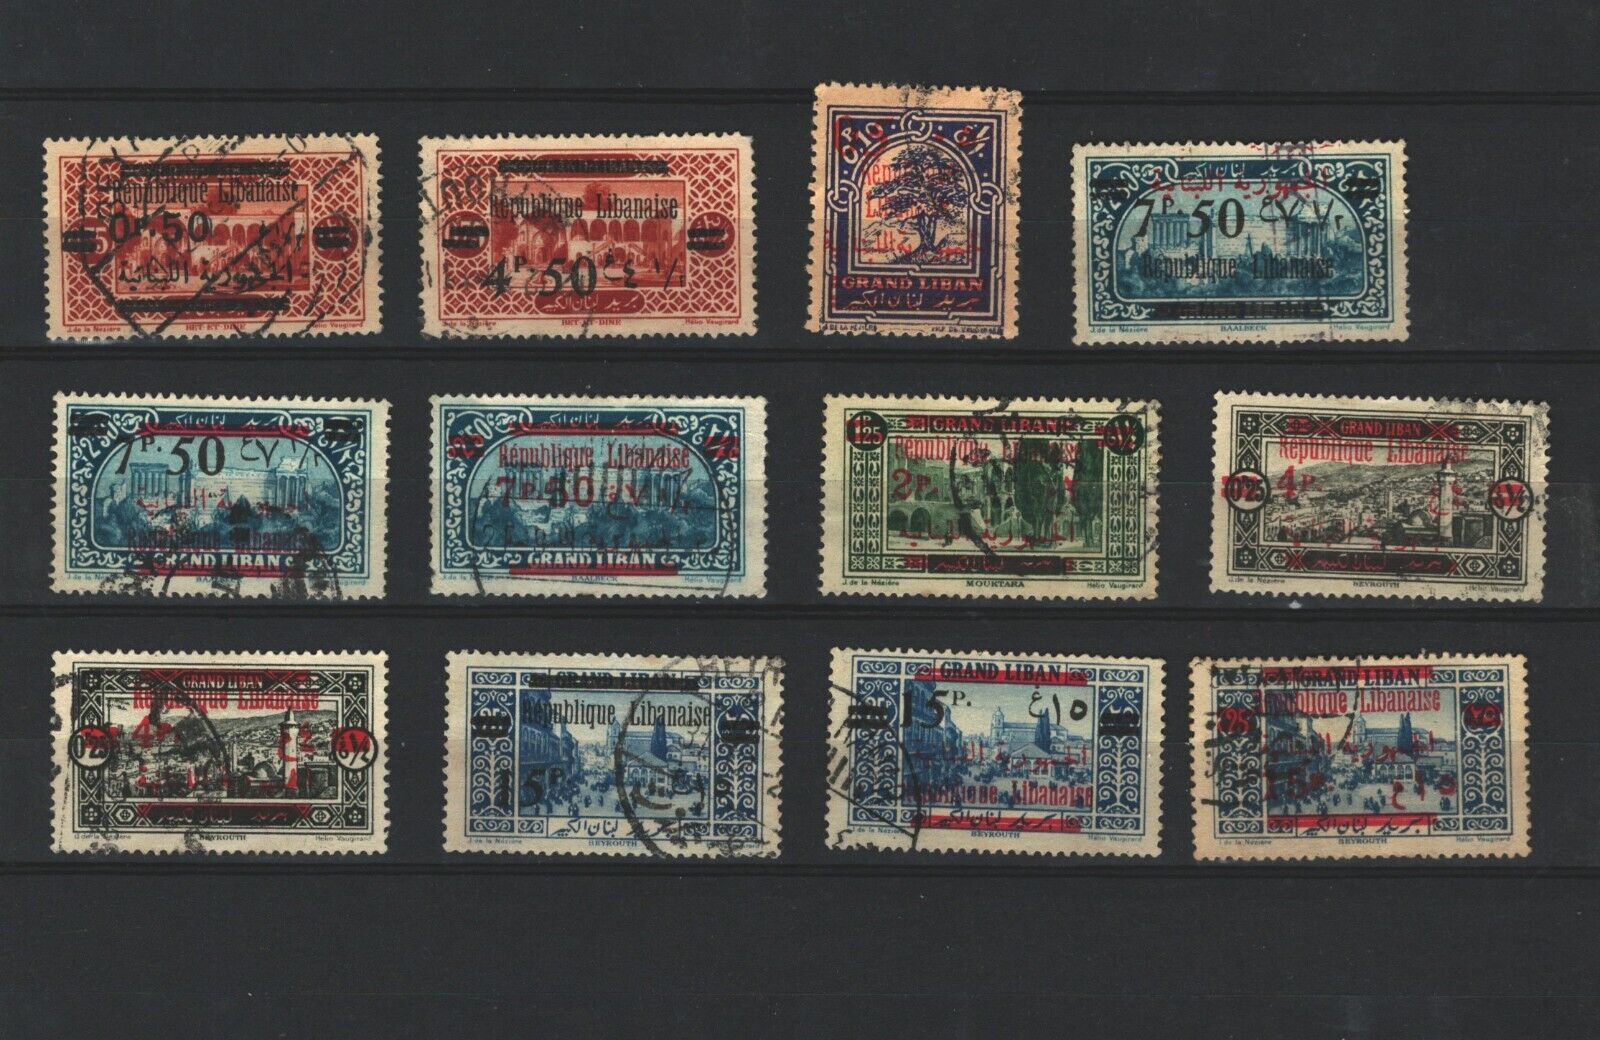 Liban  French colonies Postal USED Set of  Overprinted STAMPS LOT ( Leb 63) Без бренда